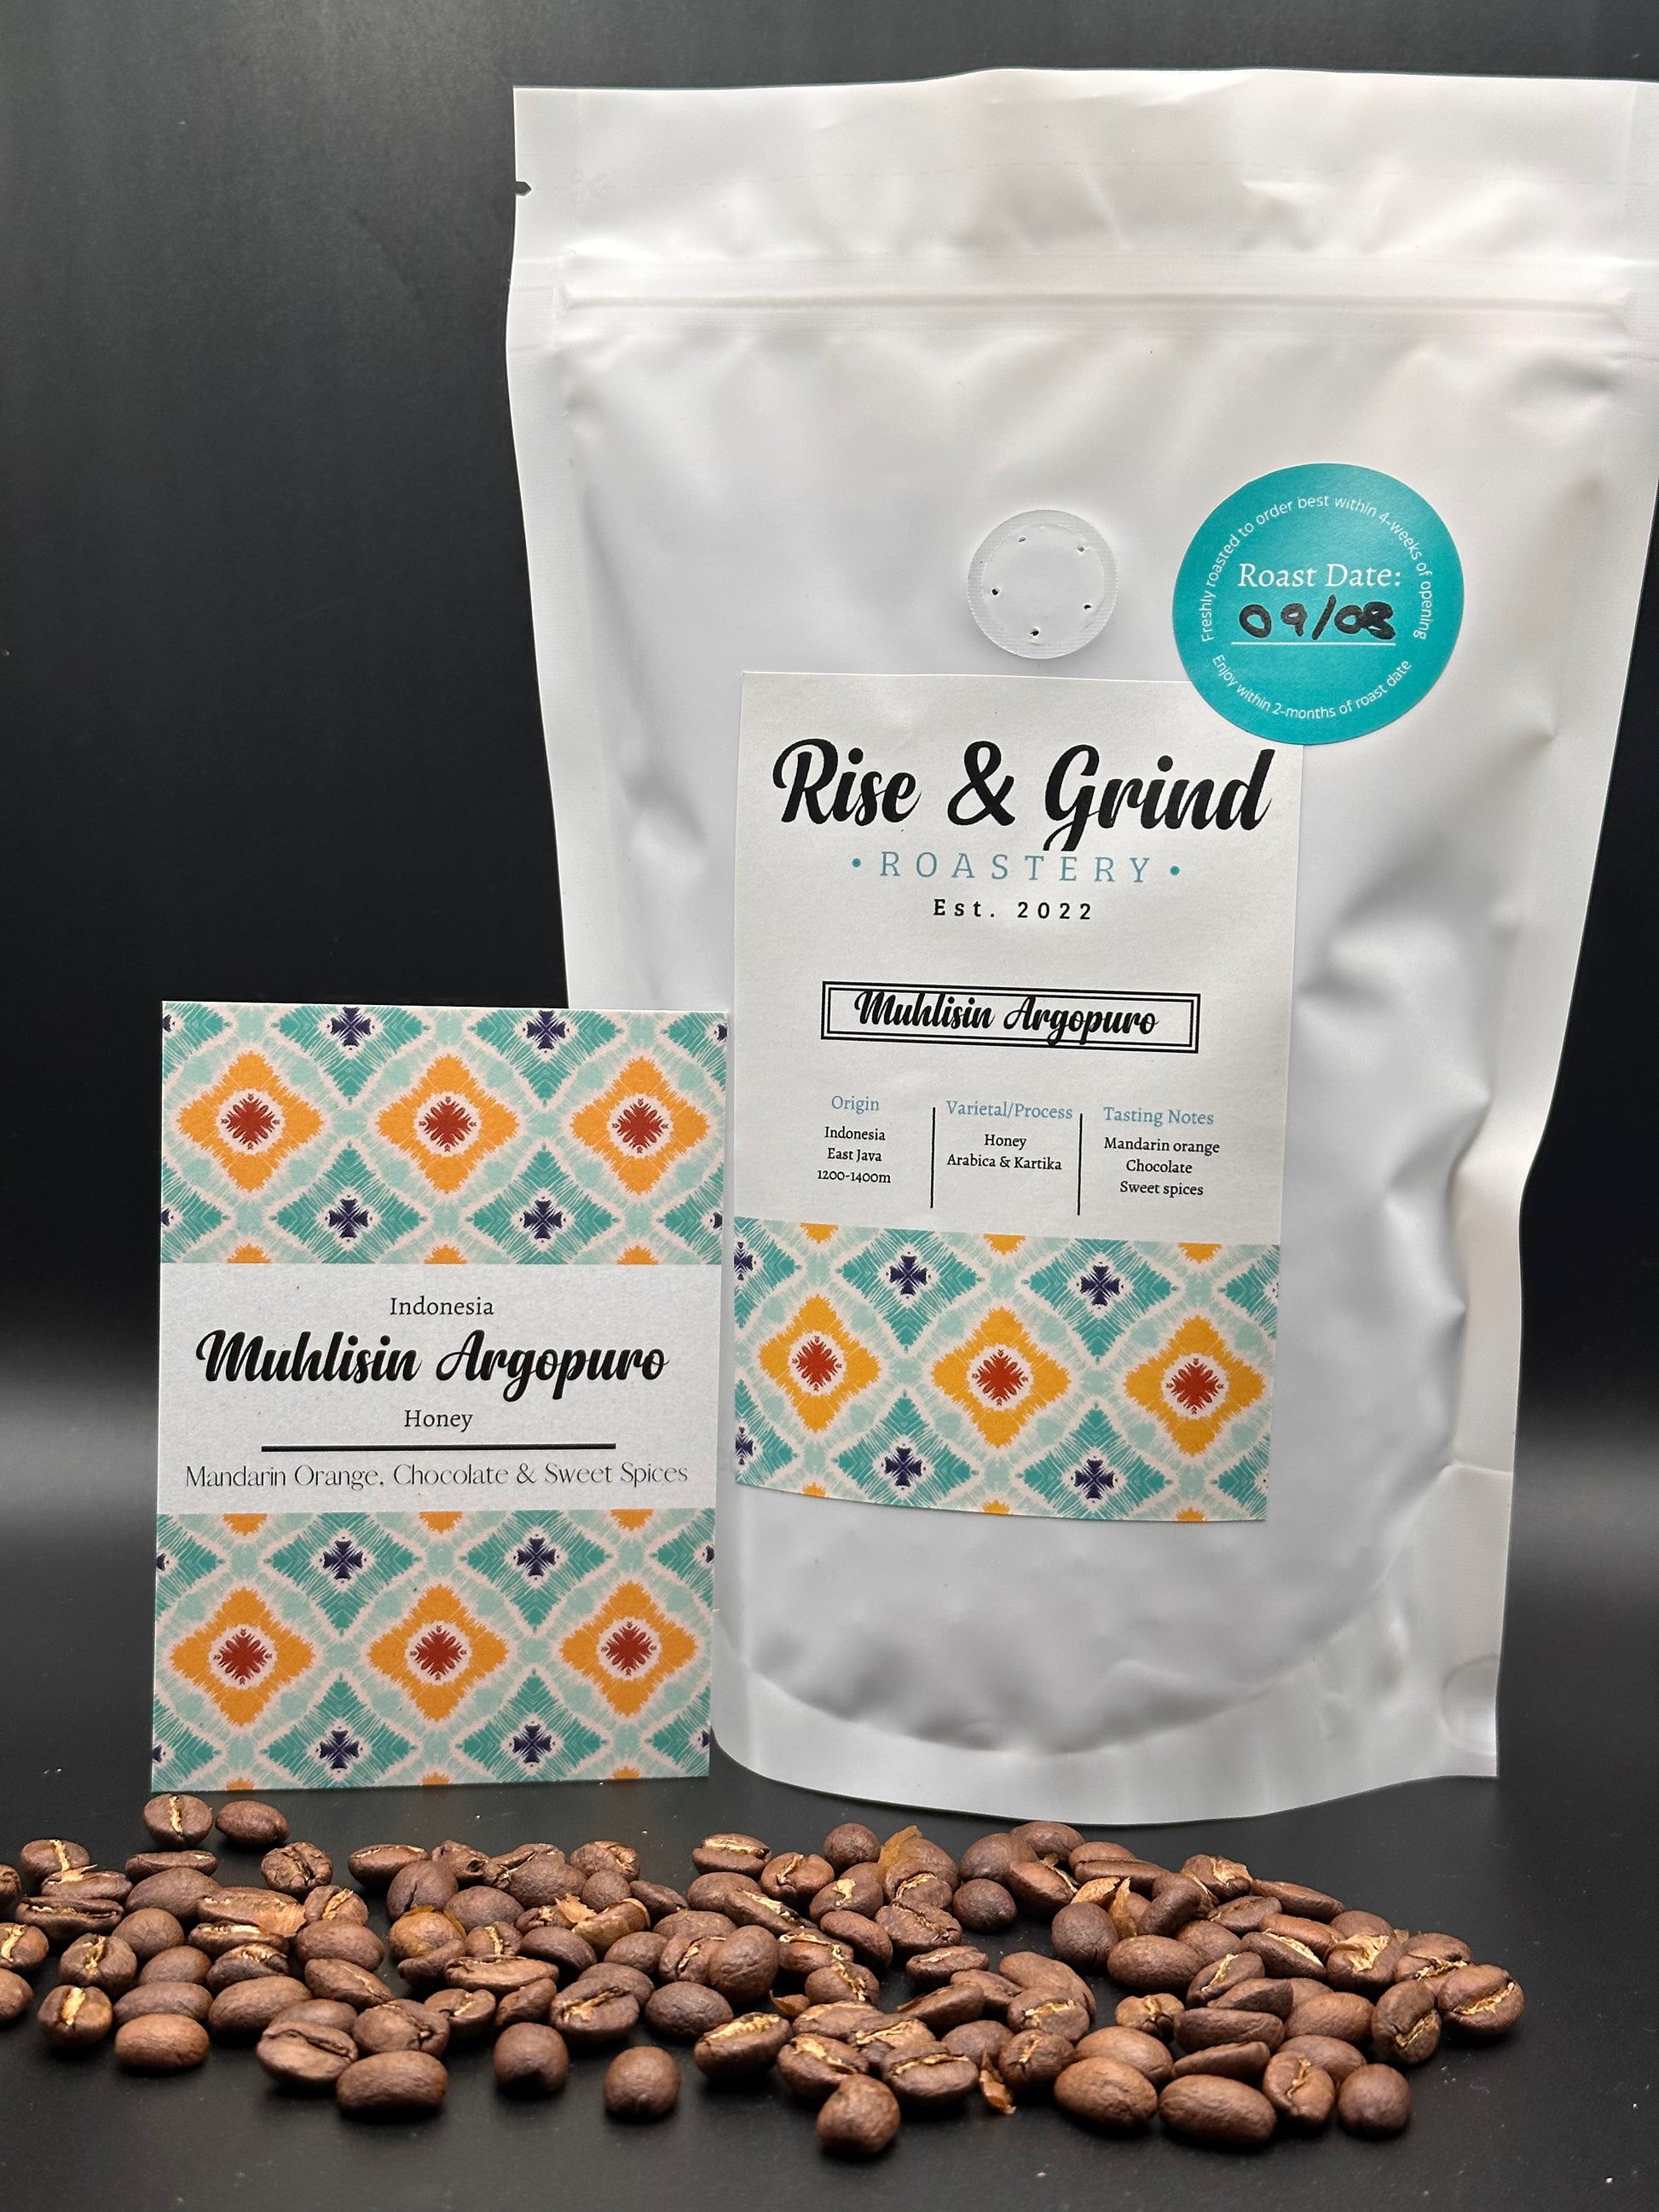 Experience the allure of our Indonesian speciality coffee, captured in this enticing image of freshly roasted beans. Savour the harmonious blend of Mandarin orange, rich chocolate, and warm cinnamon notes, encapsulated in every sip. Let the aroma transport you to the lush landscapes of Indonesia, where coffee craftsmanship meets unparalleled flavour